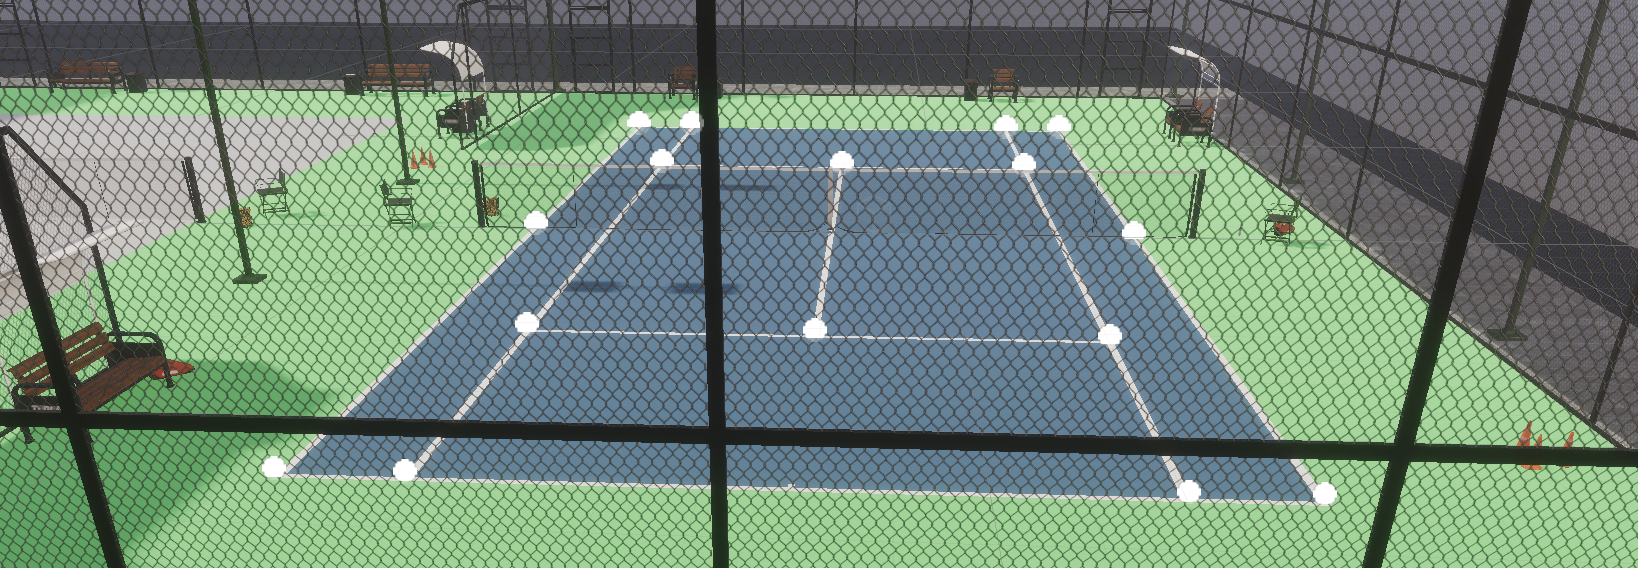 Tennis court line detector: Part 1, synthetic data generation